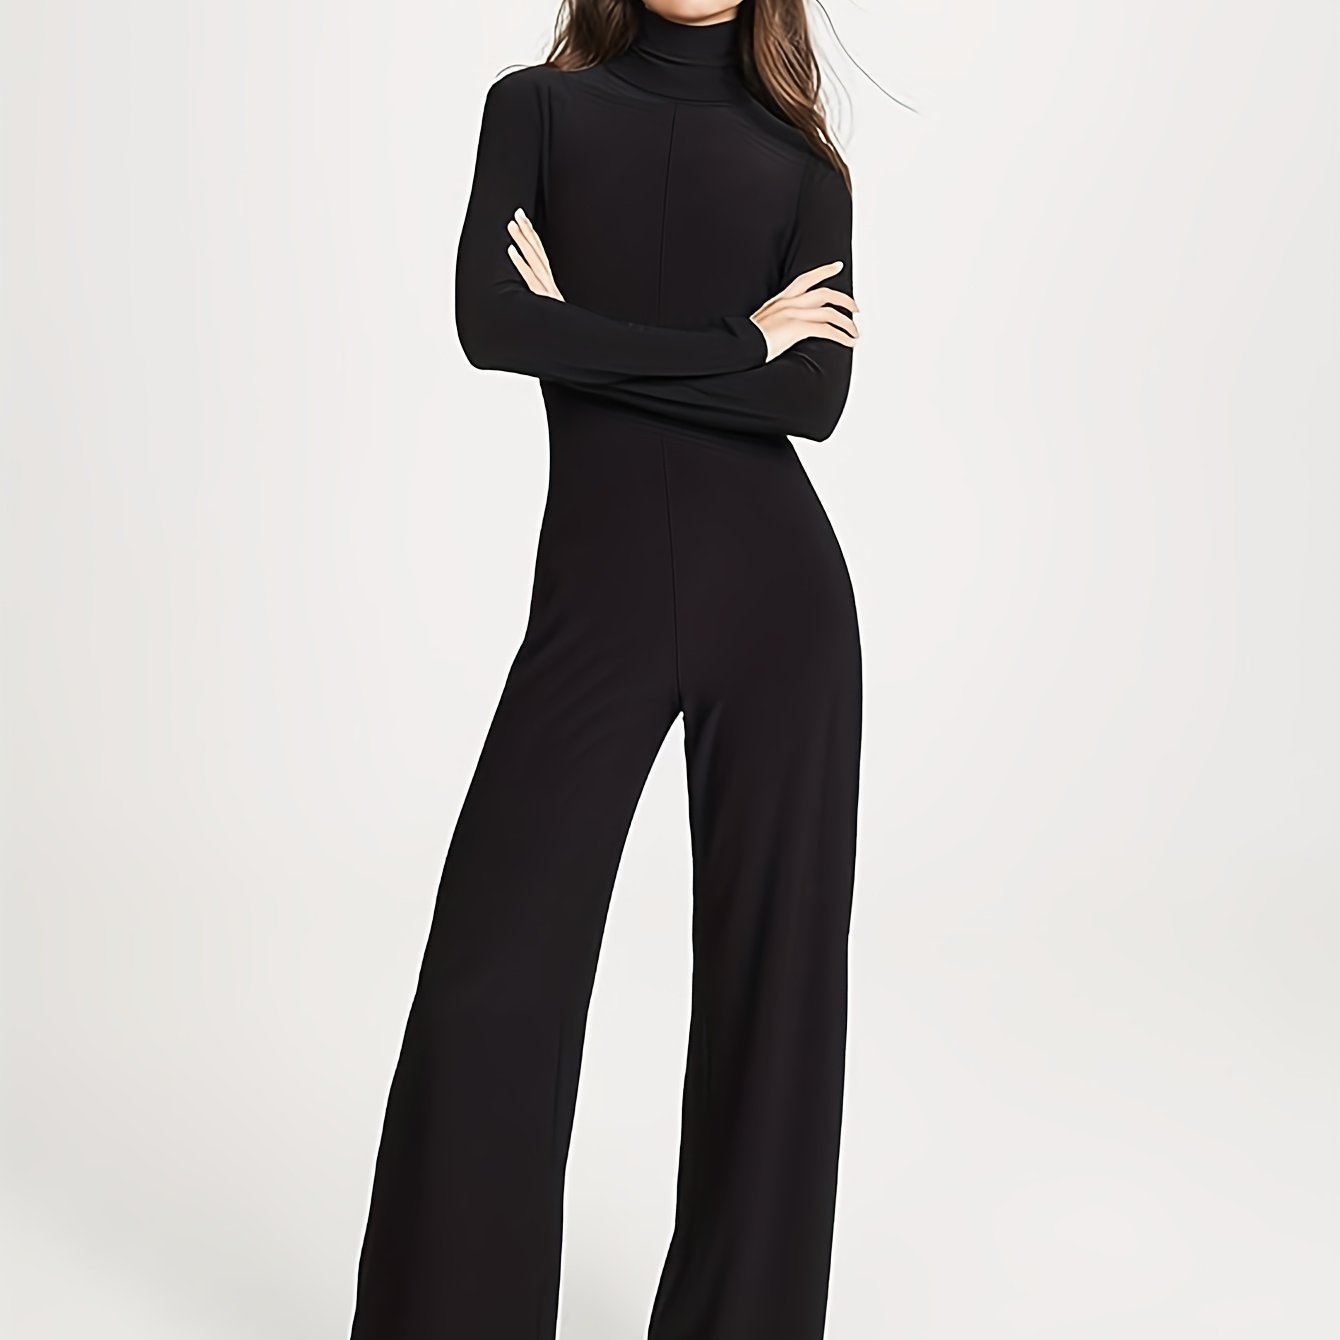 Antmvs Mock Neck Wide Leg Jumpsuit, Casual Long Sleeve Jumpsuit For Spring & Fall, Women's Clothing